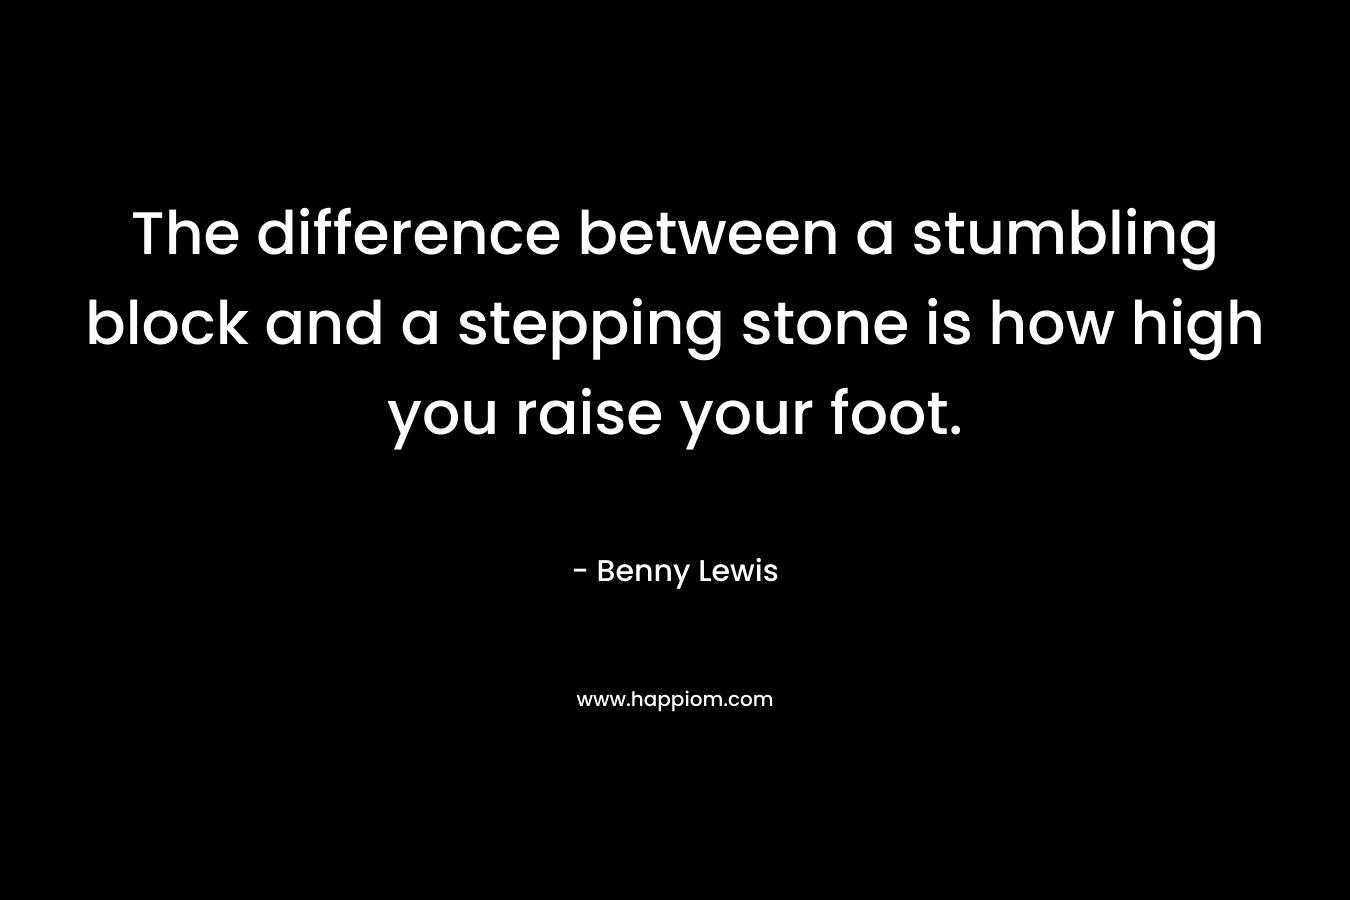 The difference between a stumbling block and a stepping stone is how high you raise your foot. – Benny Lewis